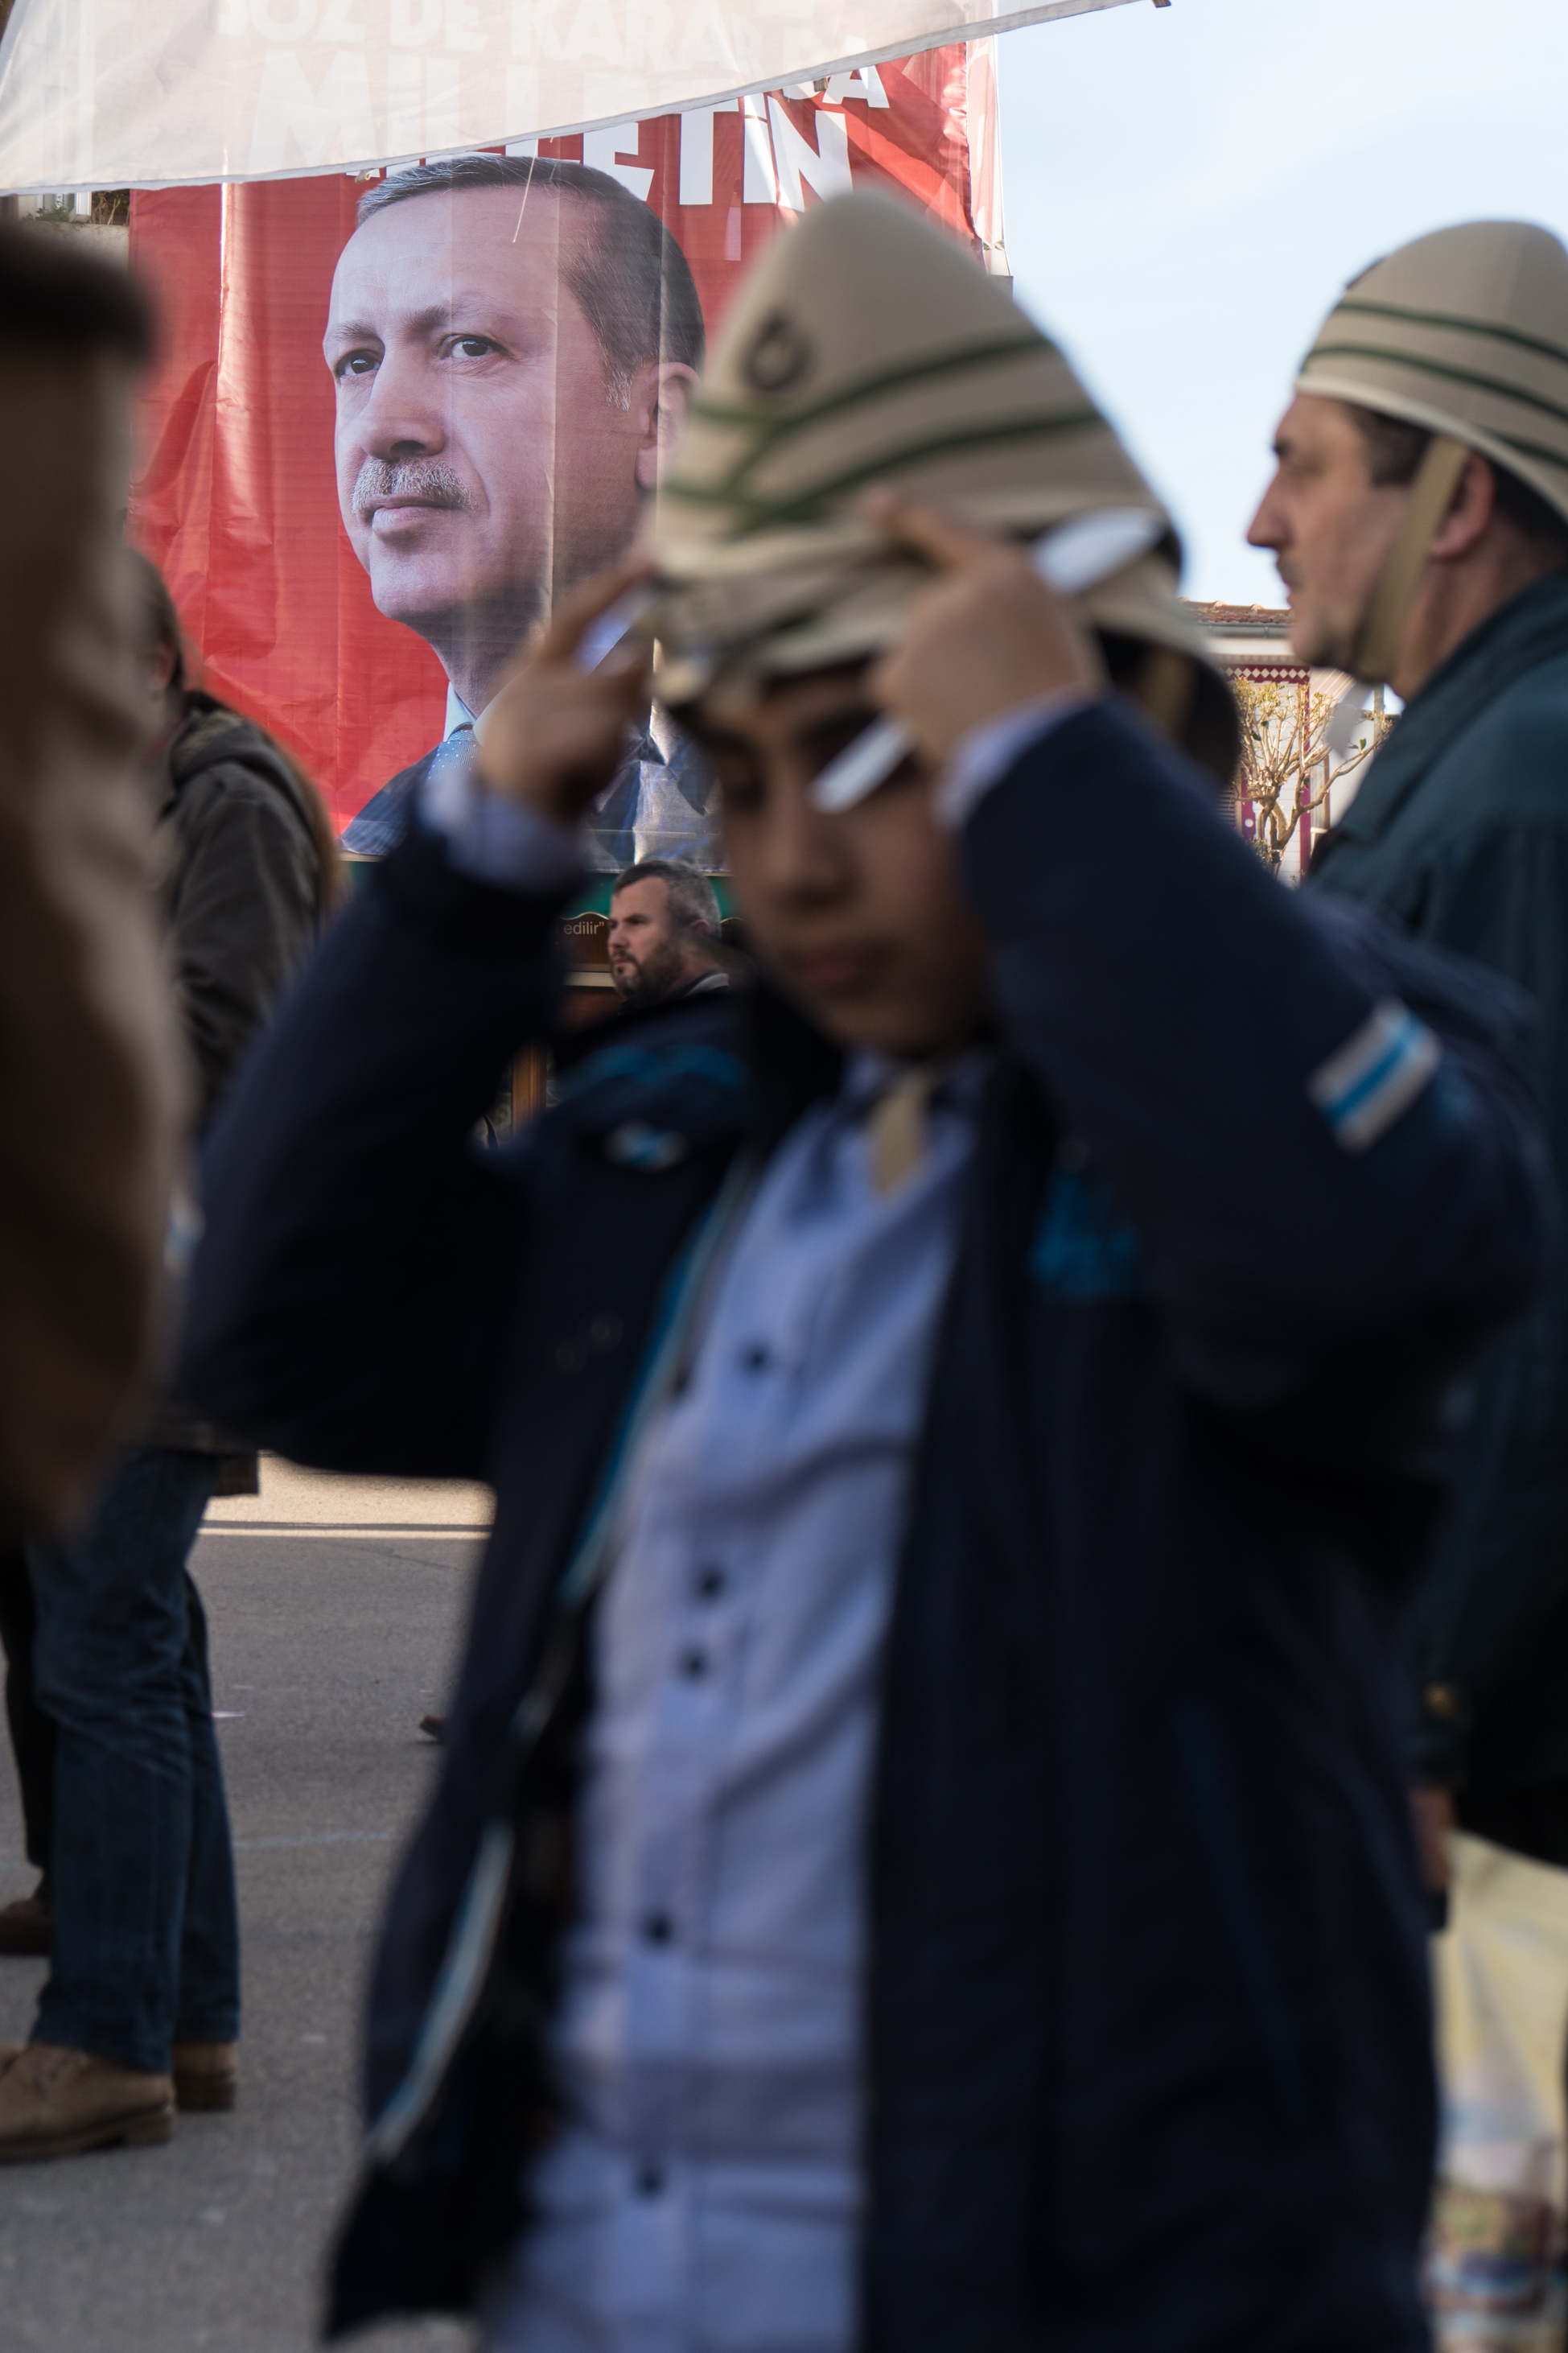 In Istanbul, in Eminönü, a pro-Erdogan rally falls on Remembrance Day for Ottomans who fell in WWI. Ralliers chant “yes” for a referendum that would allow the presidential leader full control of the government, eradicating parliament. A boy dons a Turkish Sun Helmet against an Erdogan flag.